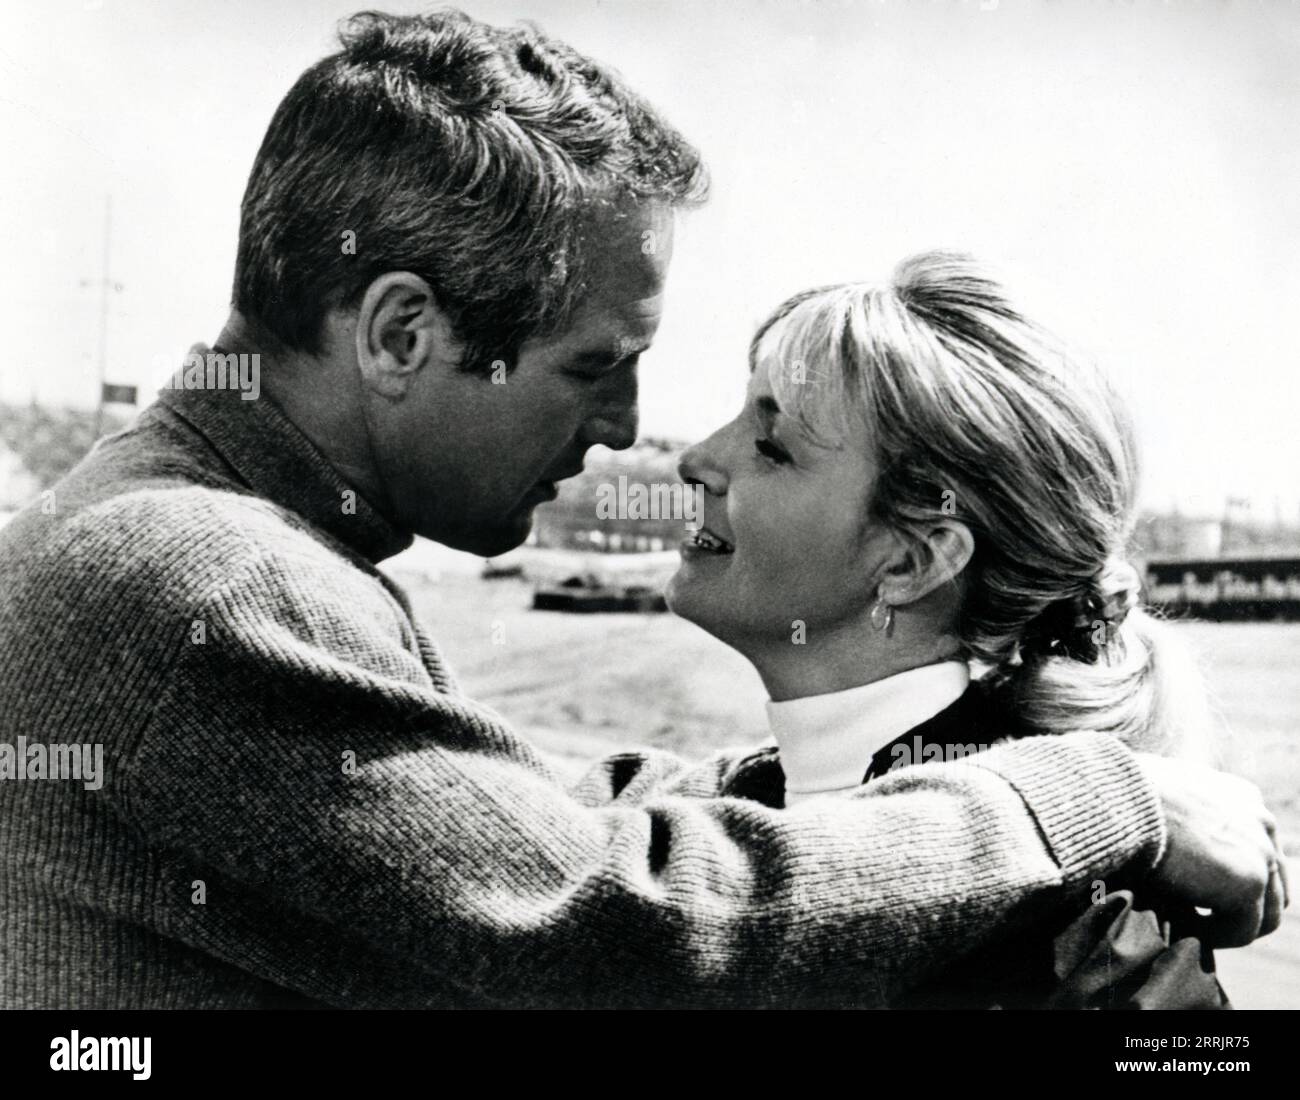 CLASSIC FILMS. Germany, 1969. Paul Newman and Joanne Woodward in a scene  from the 1969 film 'Winning' (©Universal Pictures). Captioned 11 February  2014. Ref: LMK112-47319-110214 WWW.LMKMEDIA.COM Supplied by LMK Media.  Editorial Only.